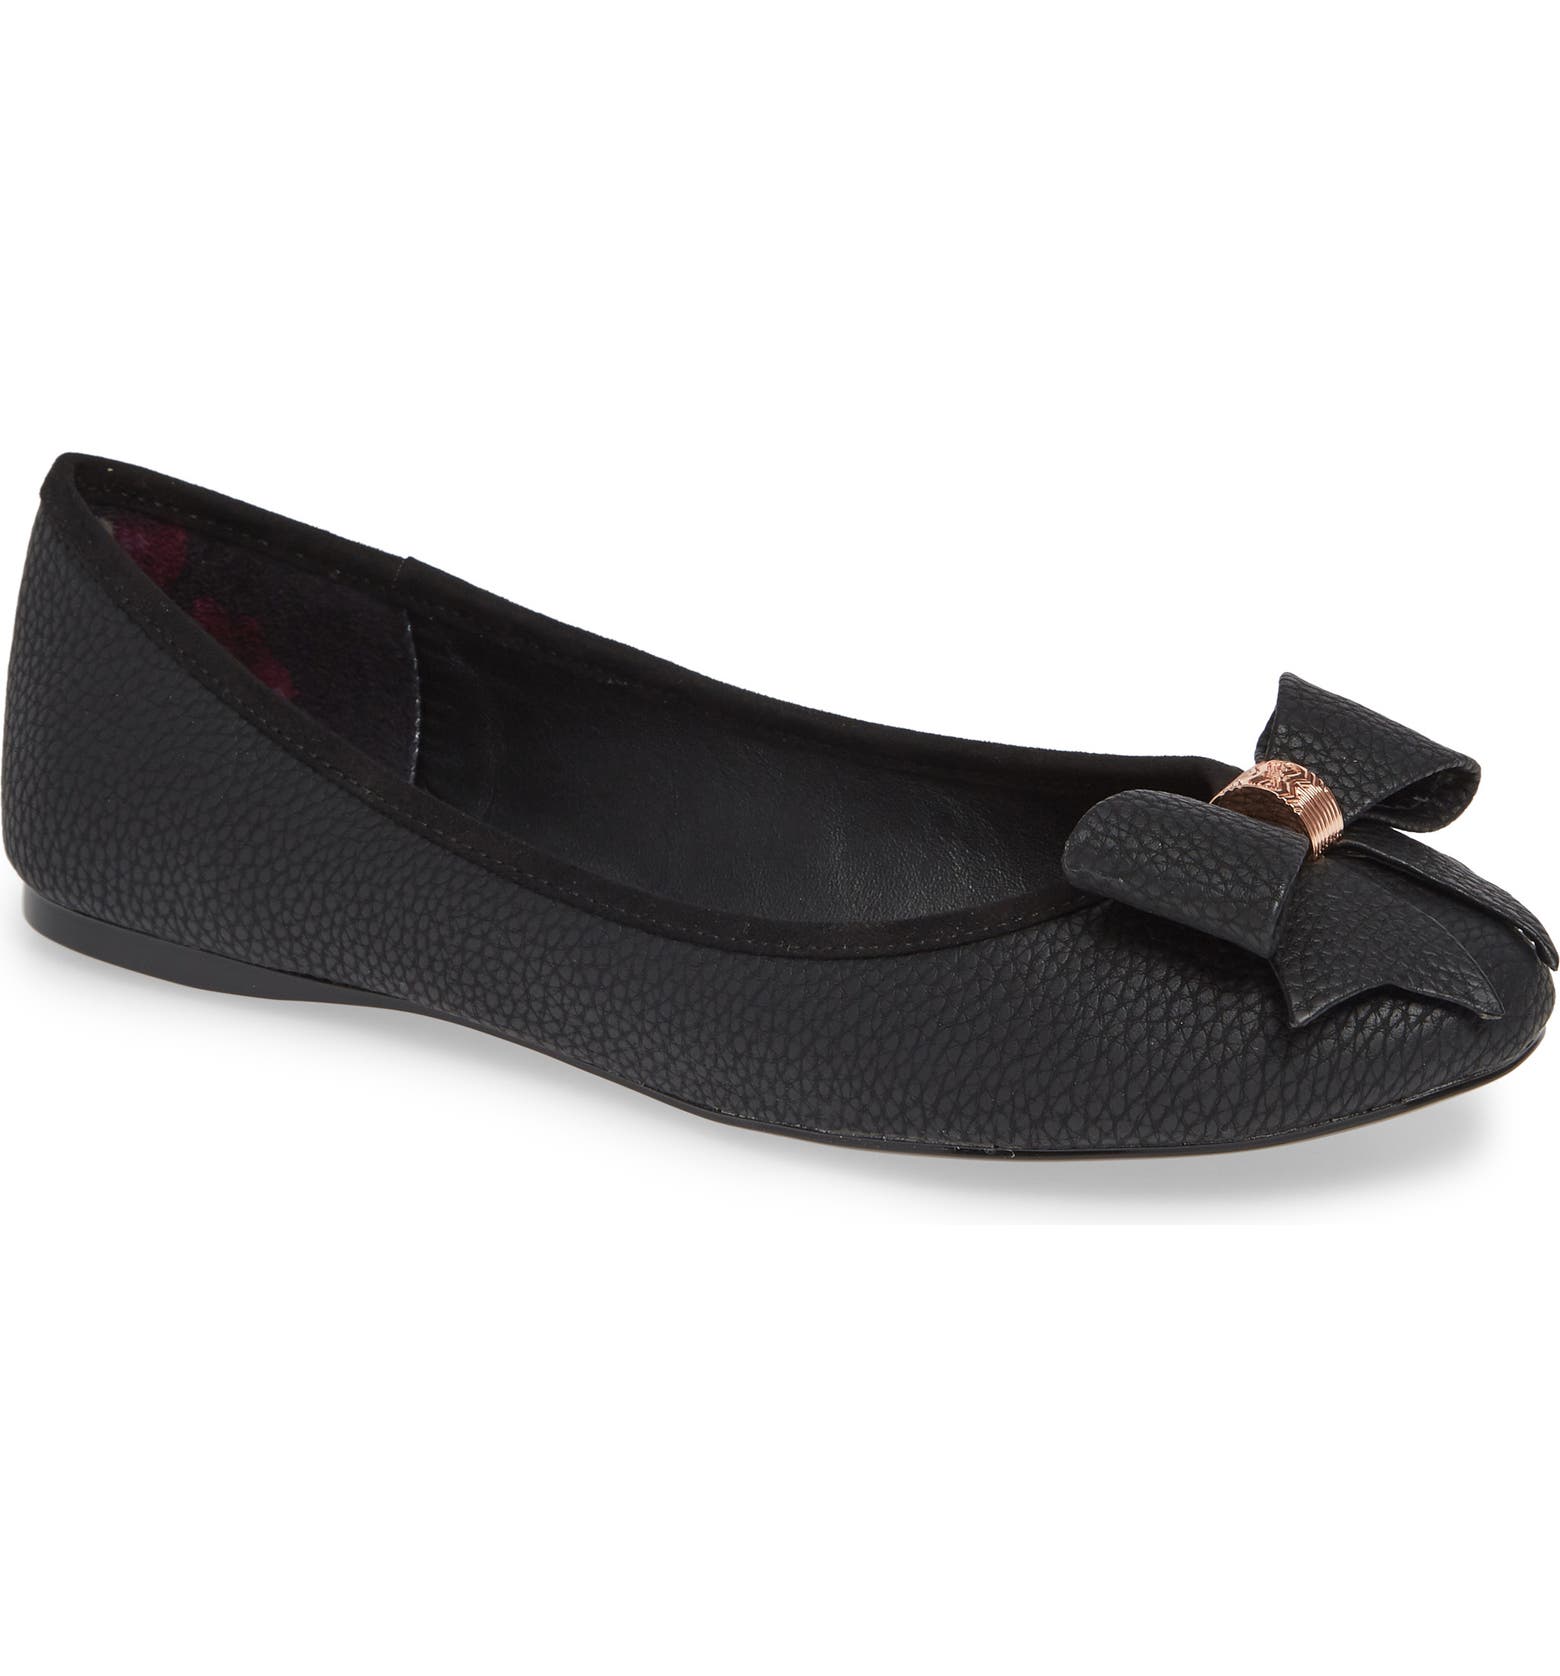 Black Ted Baker ballet flats with bow